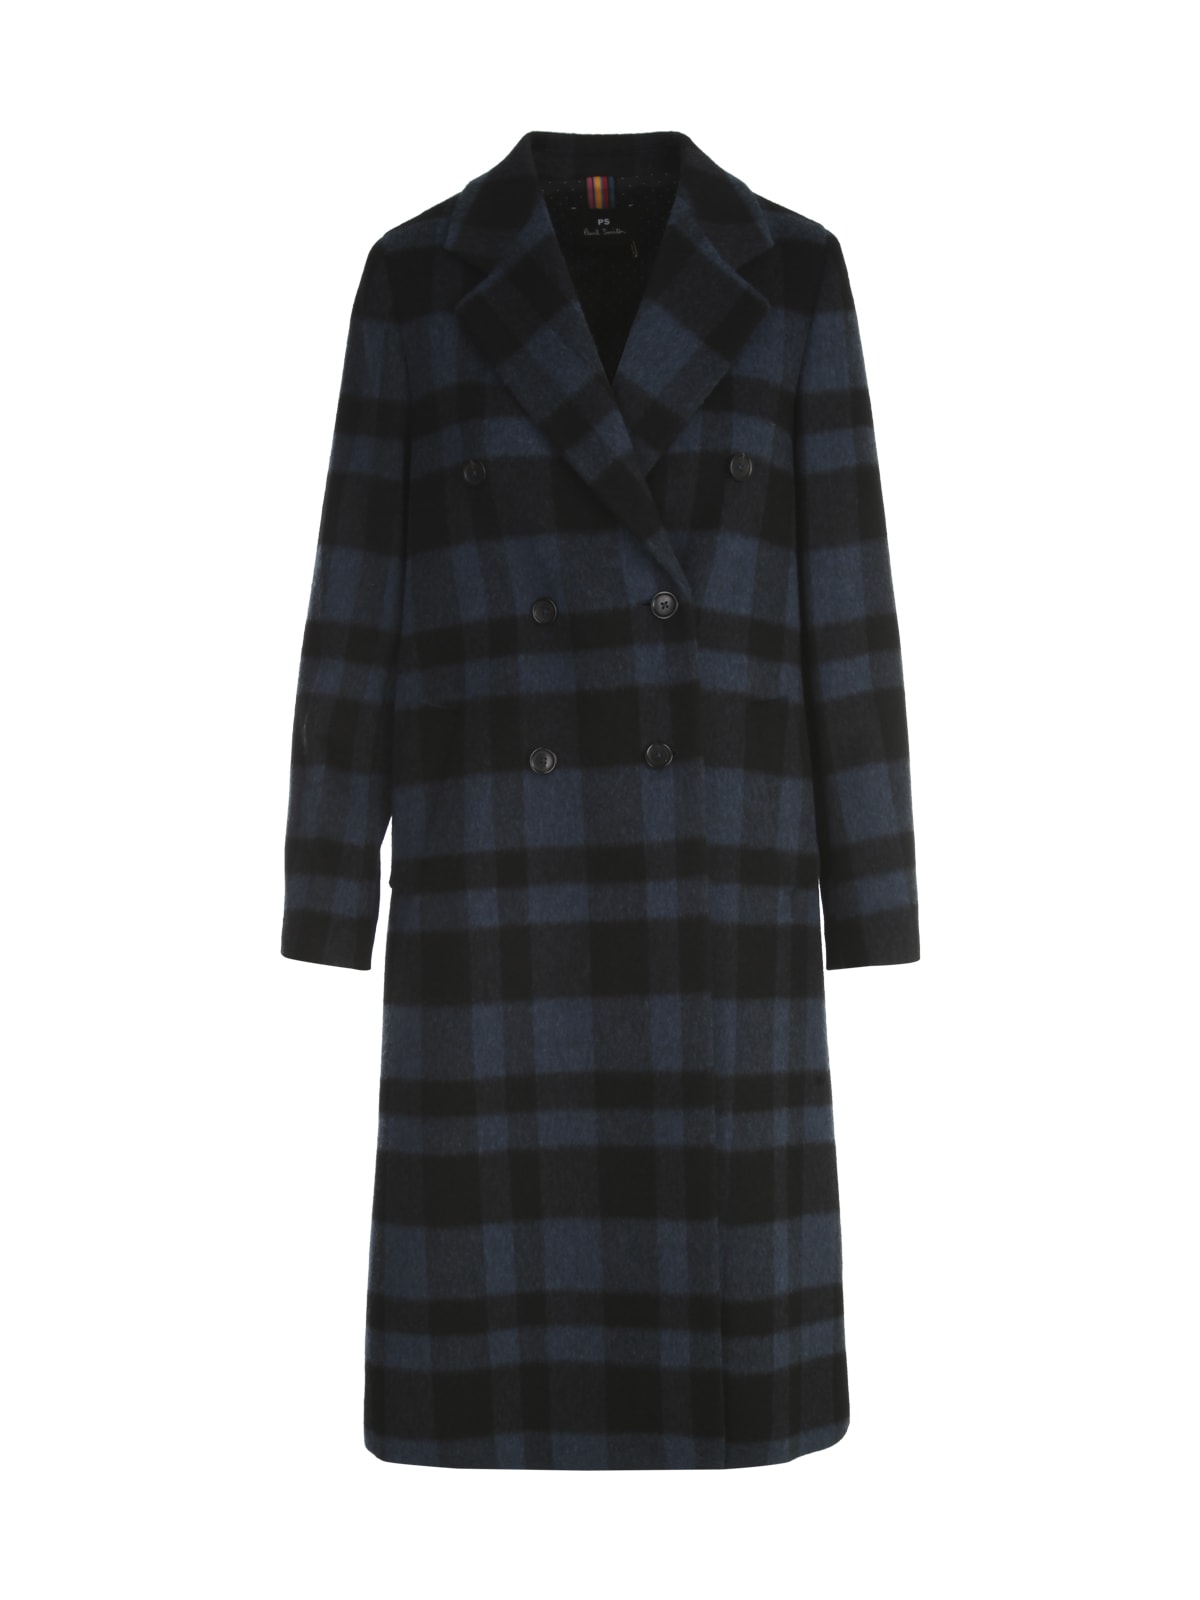 PS by Paul Smith Long Checked Double Breasted Coat